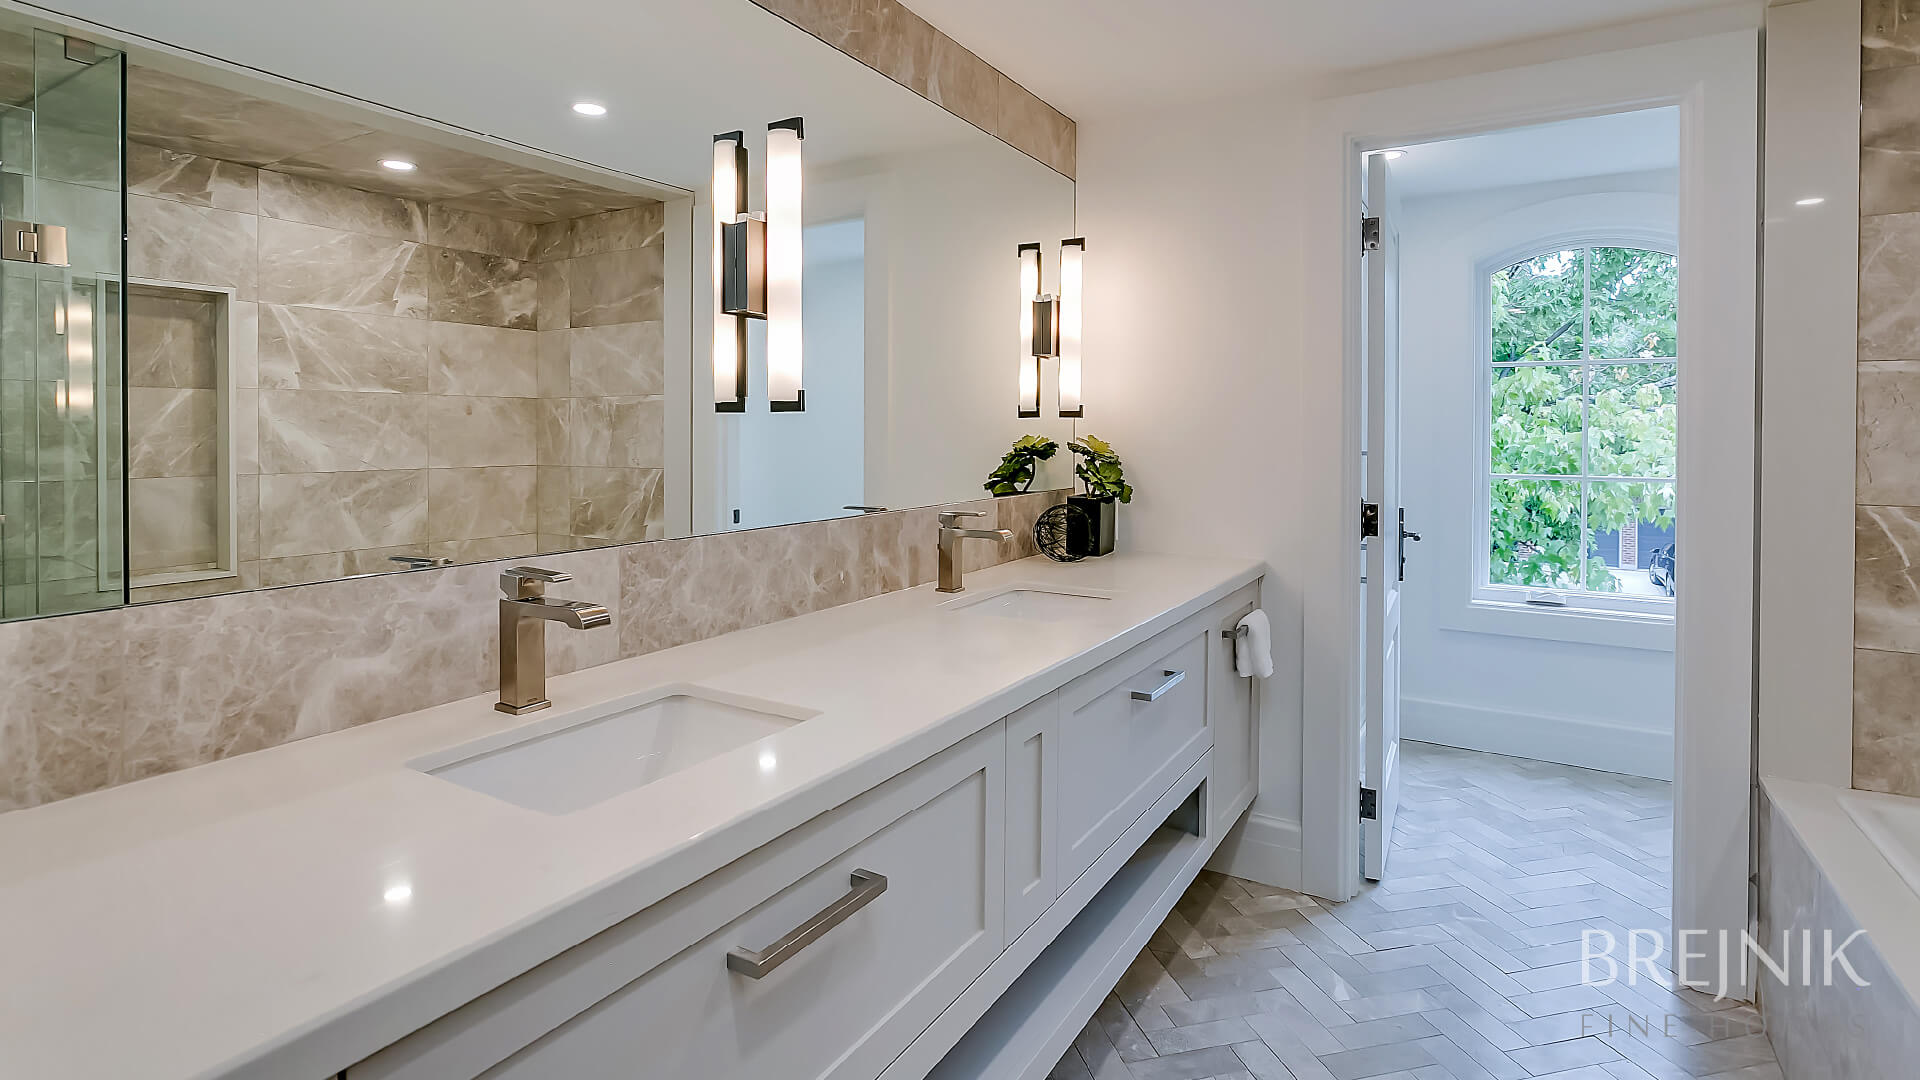 Custom bathroom counters and cabinets